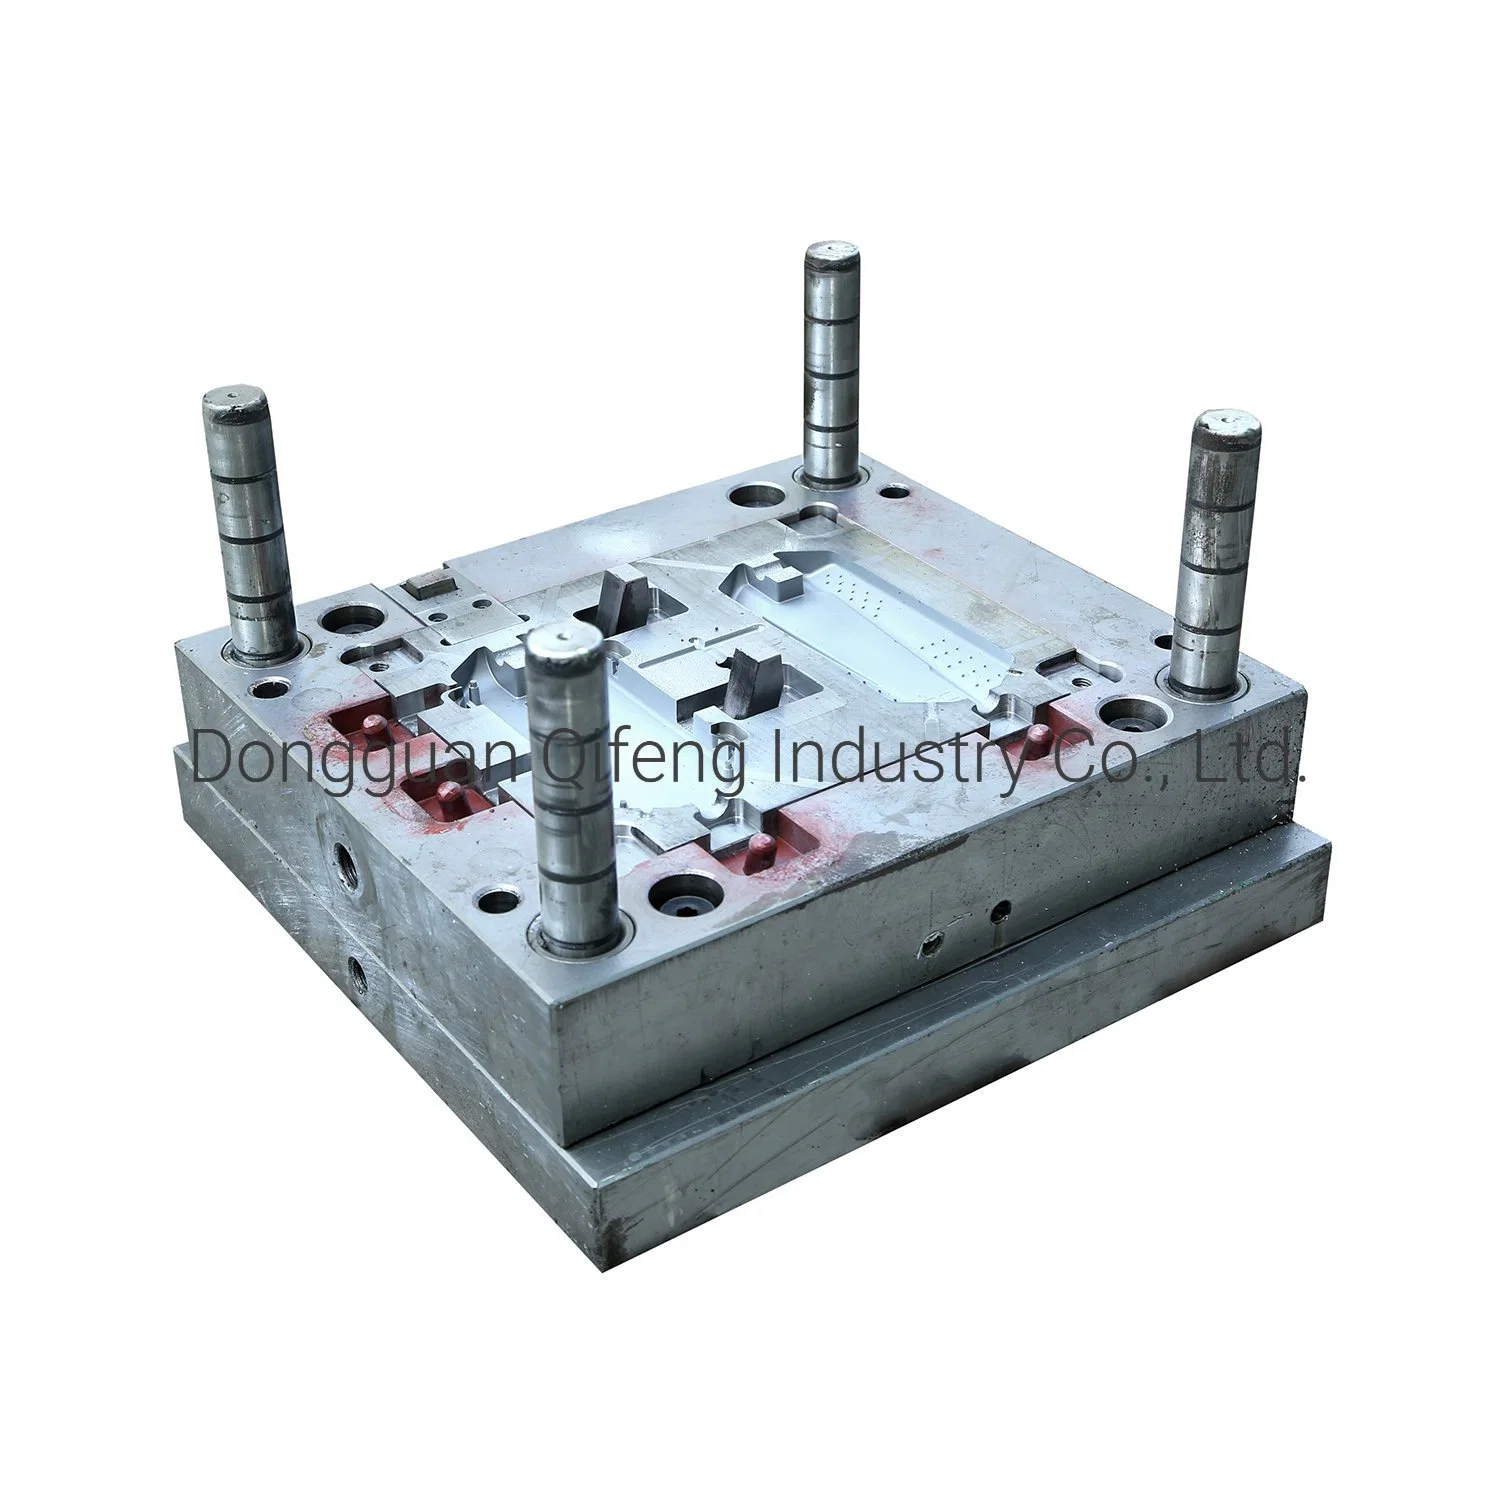 15+ Years Plastic Injection Mould Manufacturer Maker Customized Computer Spare Parts/Plastic Products for Bluetooth Wireless Devices 2.4GHz/5GHz WiFi Nb Iot